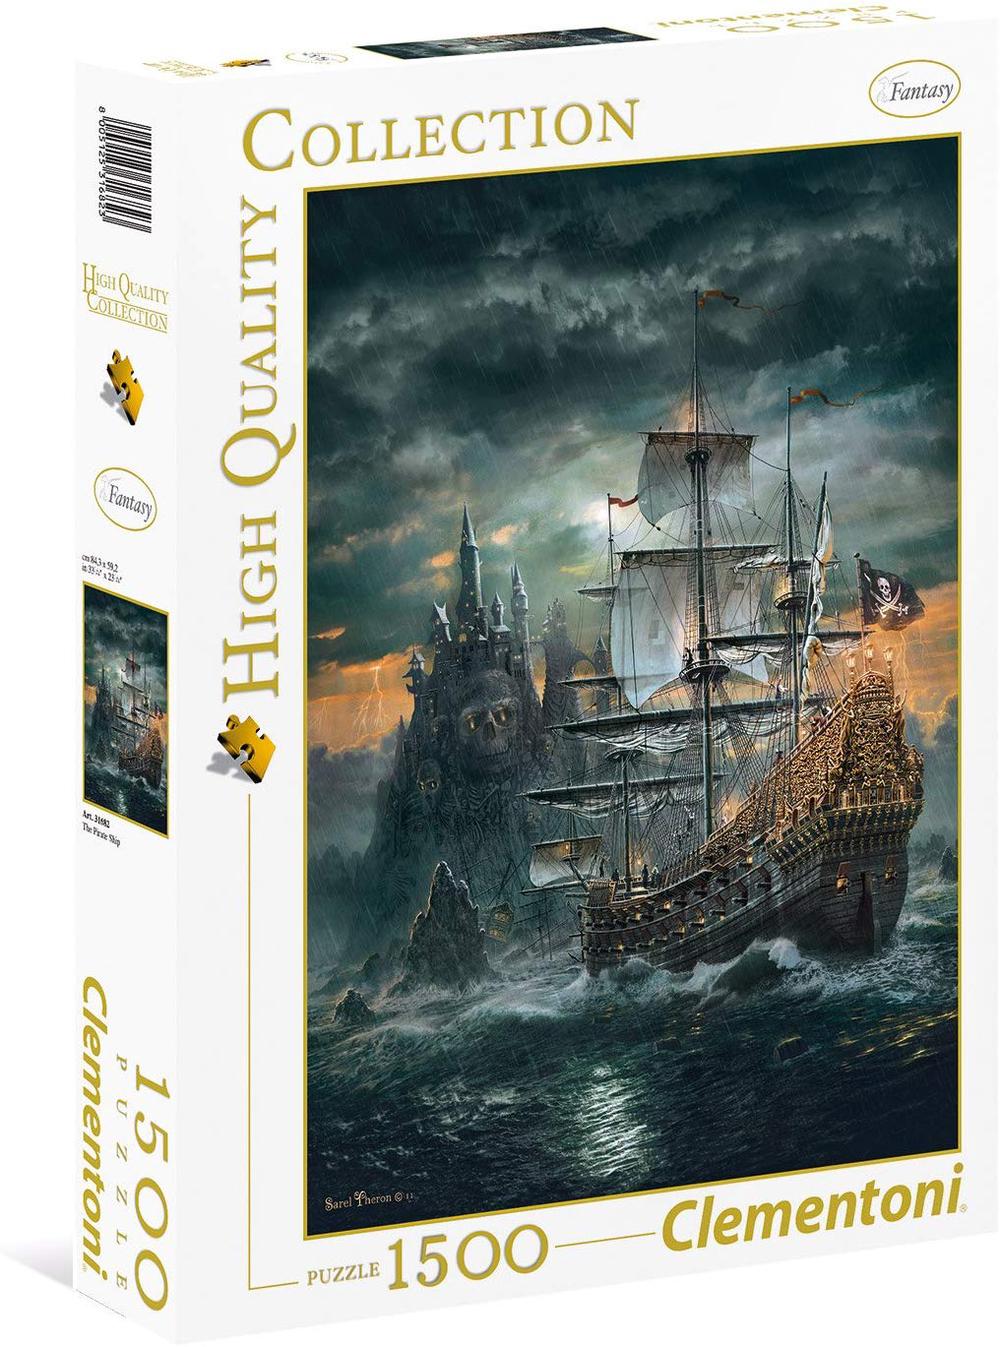 The Pirate ship - 1500pc Jigsaw Puzzle - HQ - Clementoni